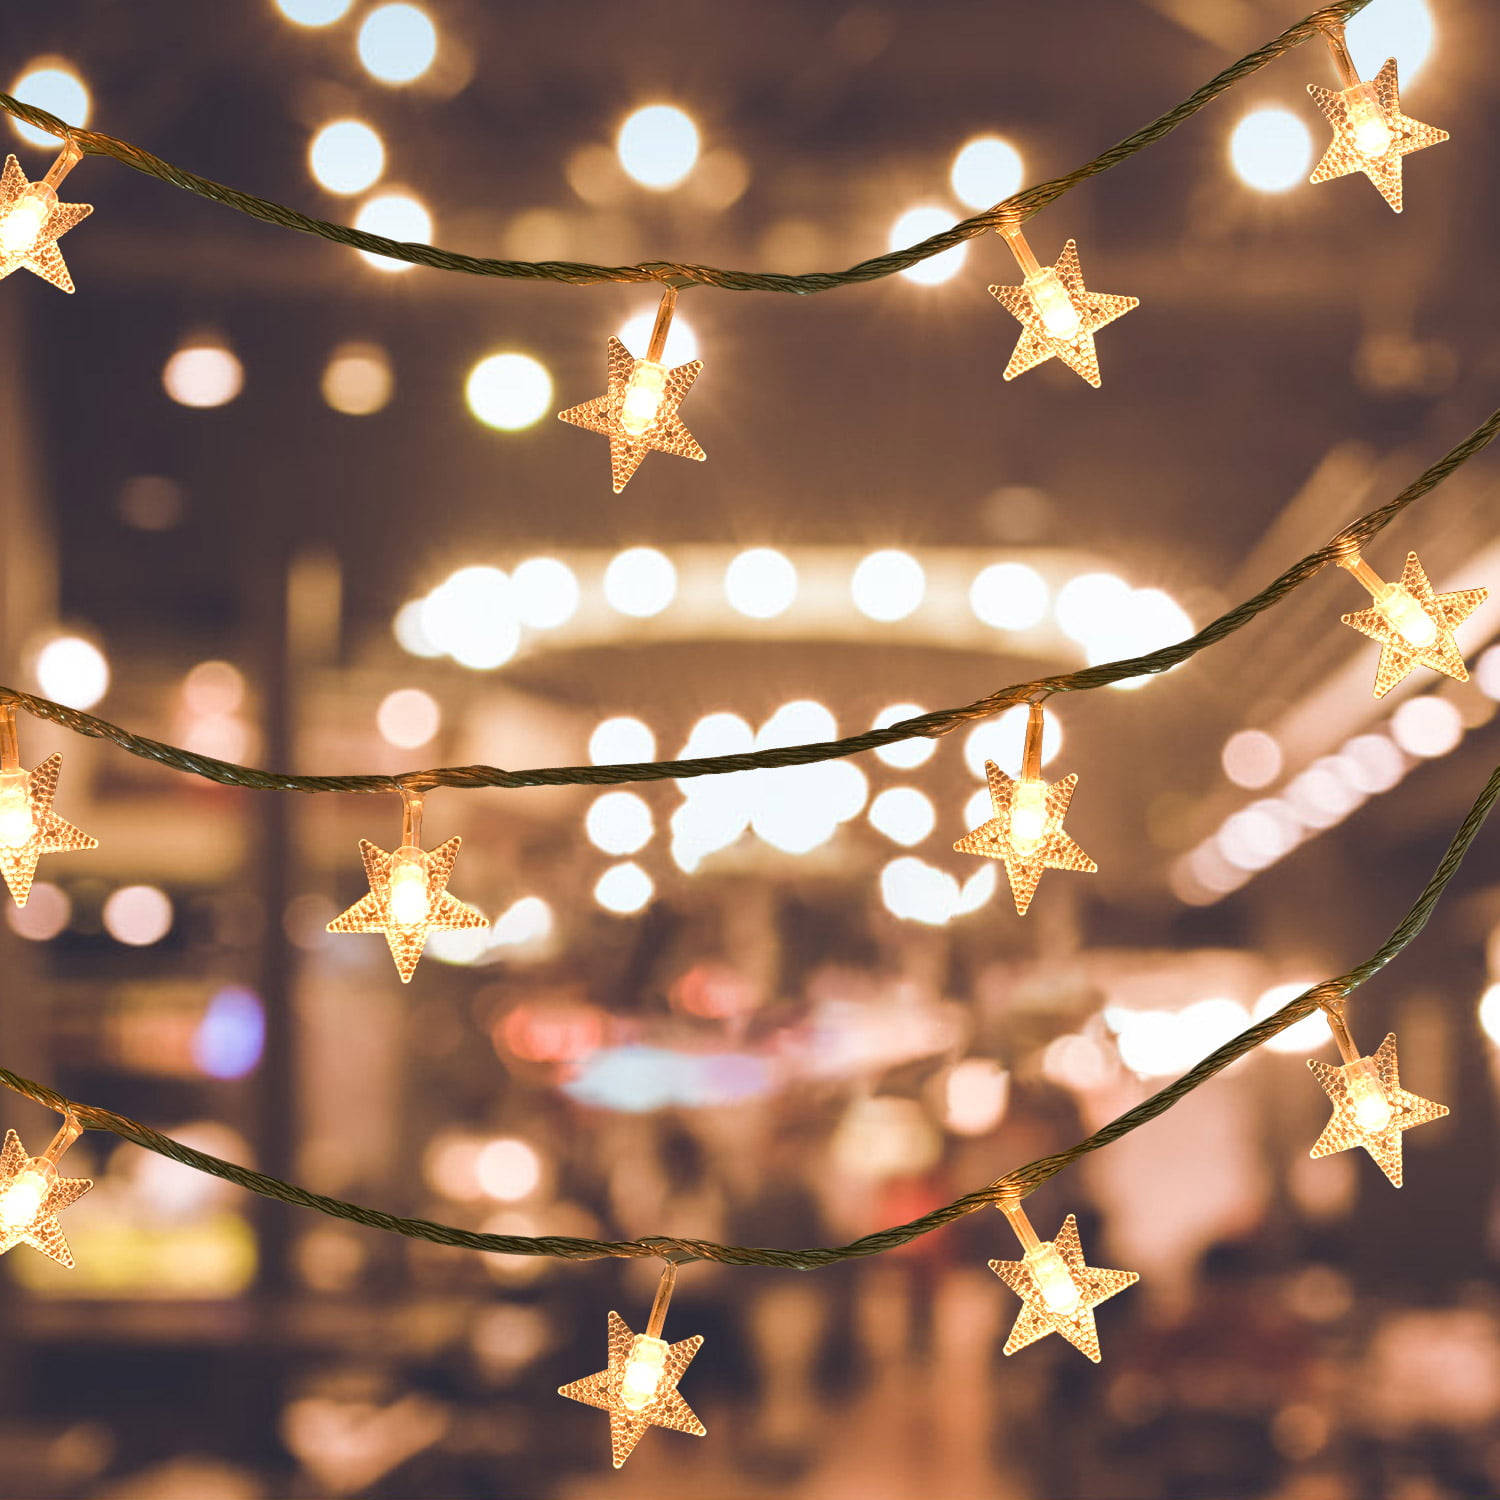 Enjoy the beauty of fairy lights twinkle away and create a dazzling elegant atmosphere Wallpaper